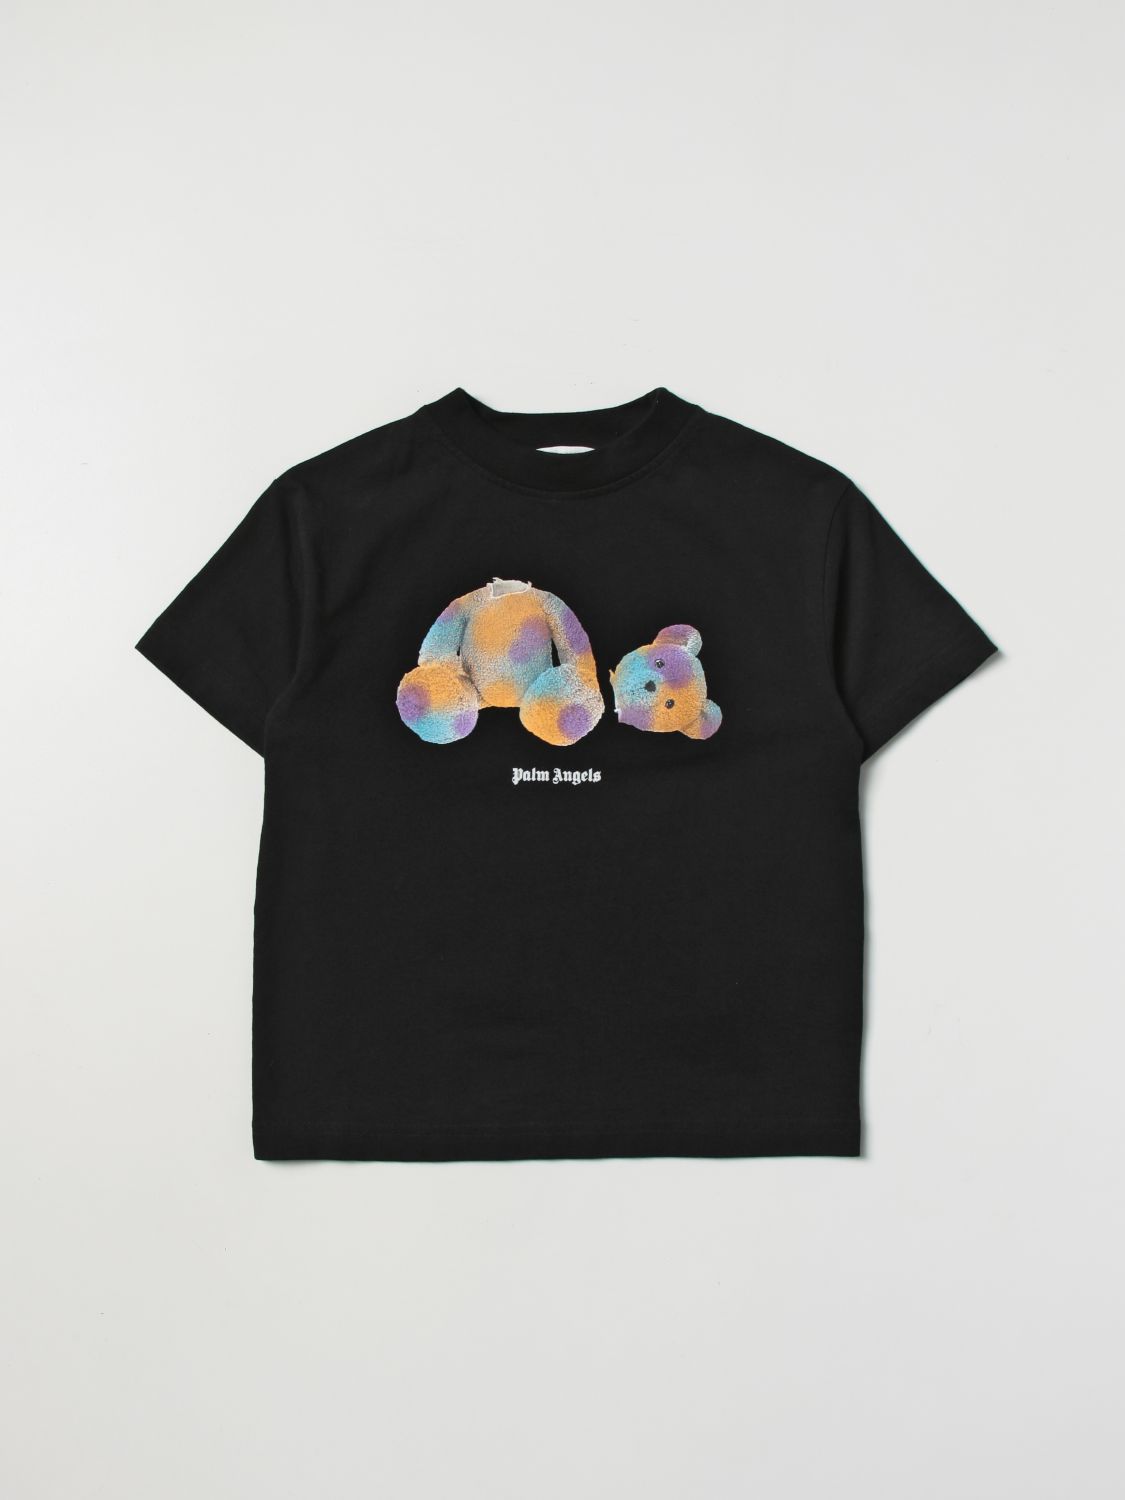 T-shirt Palm Angels: T-Shirt Bear multicolor Palm Angels in cotone nero 1